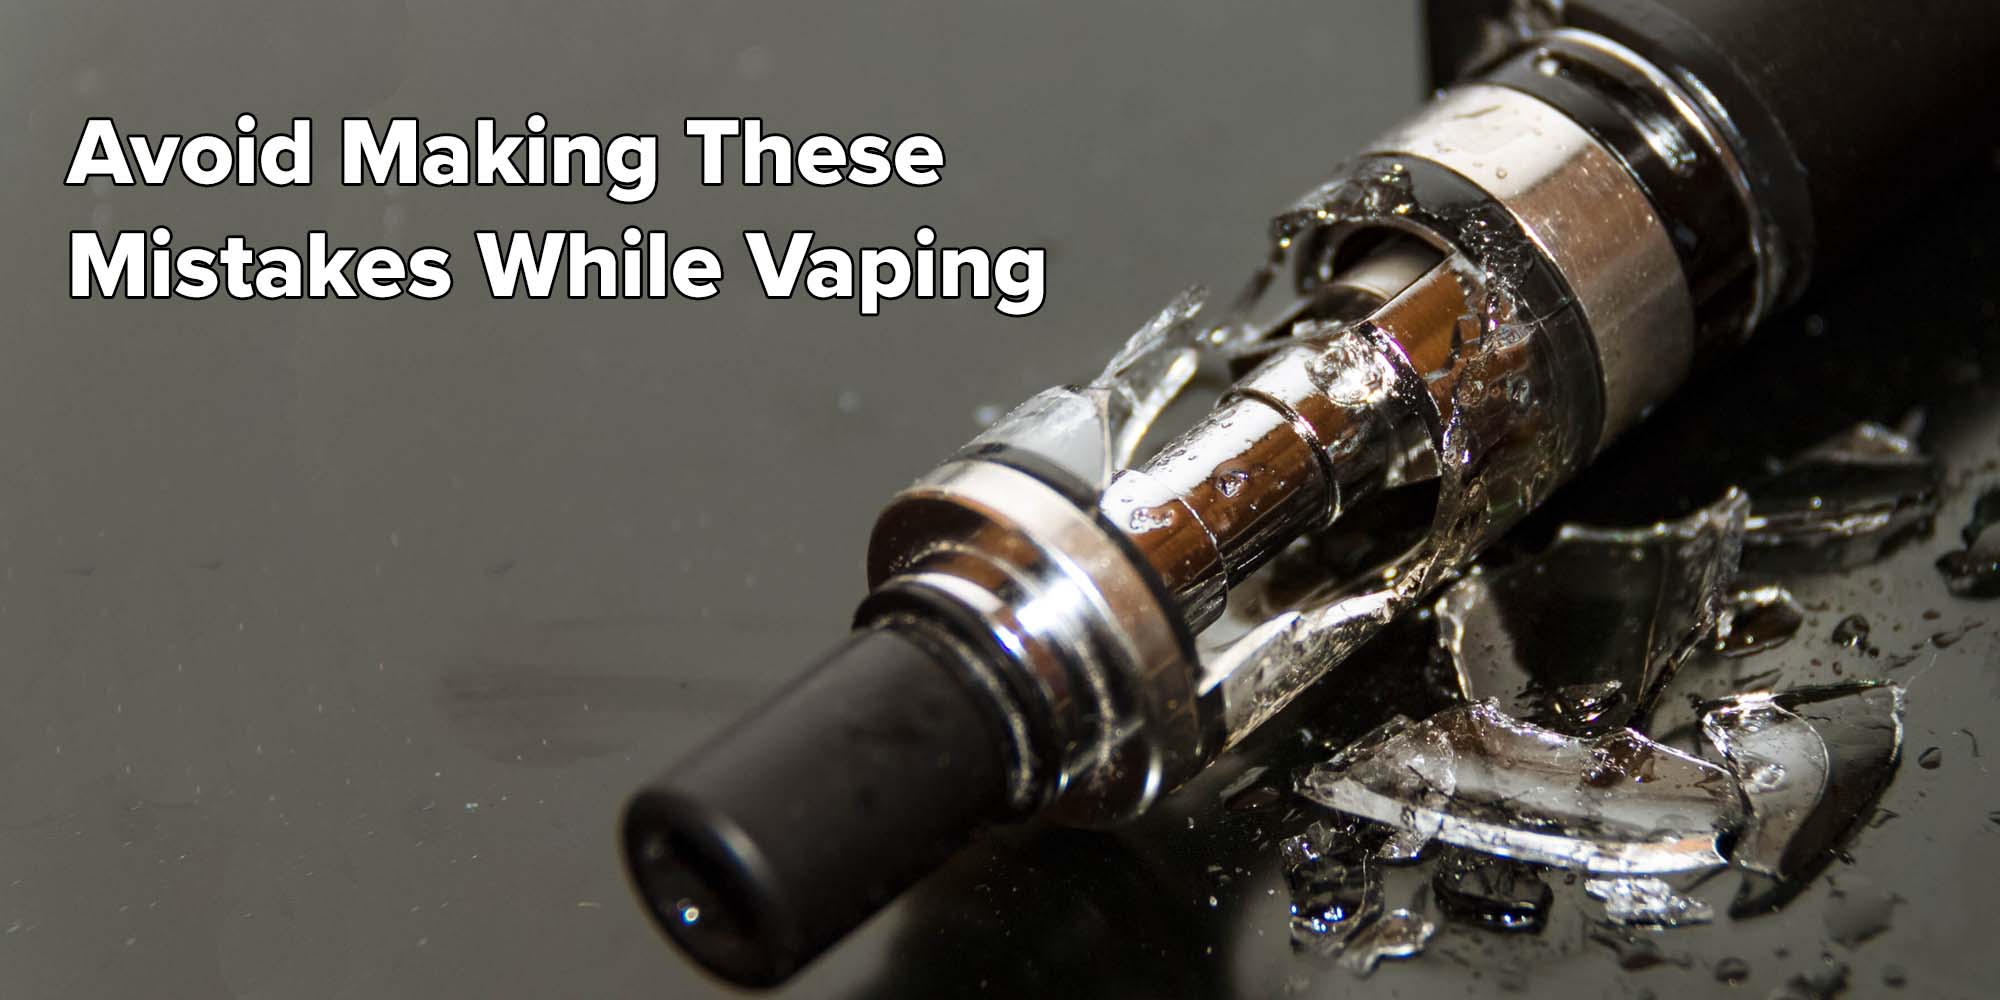 Avoid Making These Mistakes While Vaping